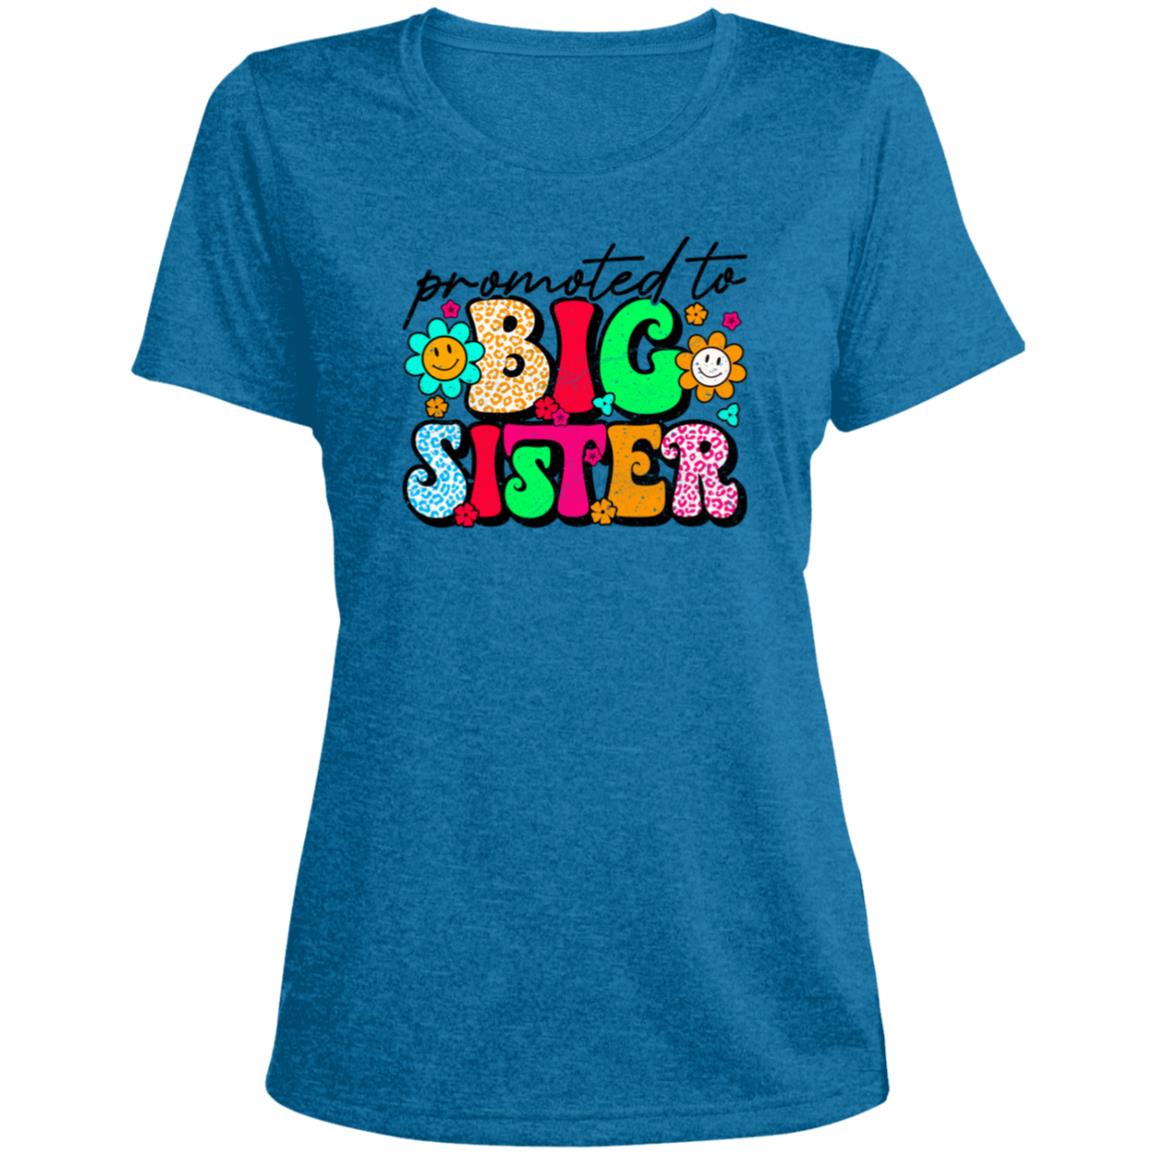 Promoted To Big Sister Short Sleeve Heather T-Shirt-TD Gift Solutions.com